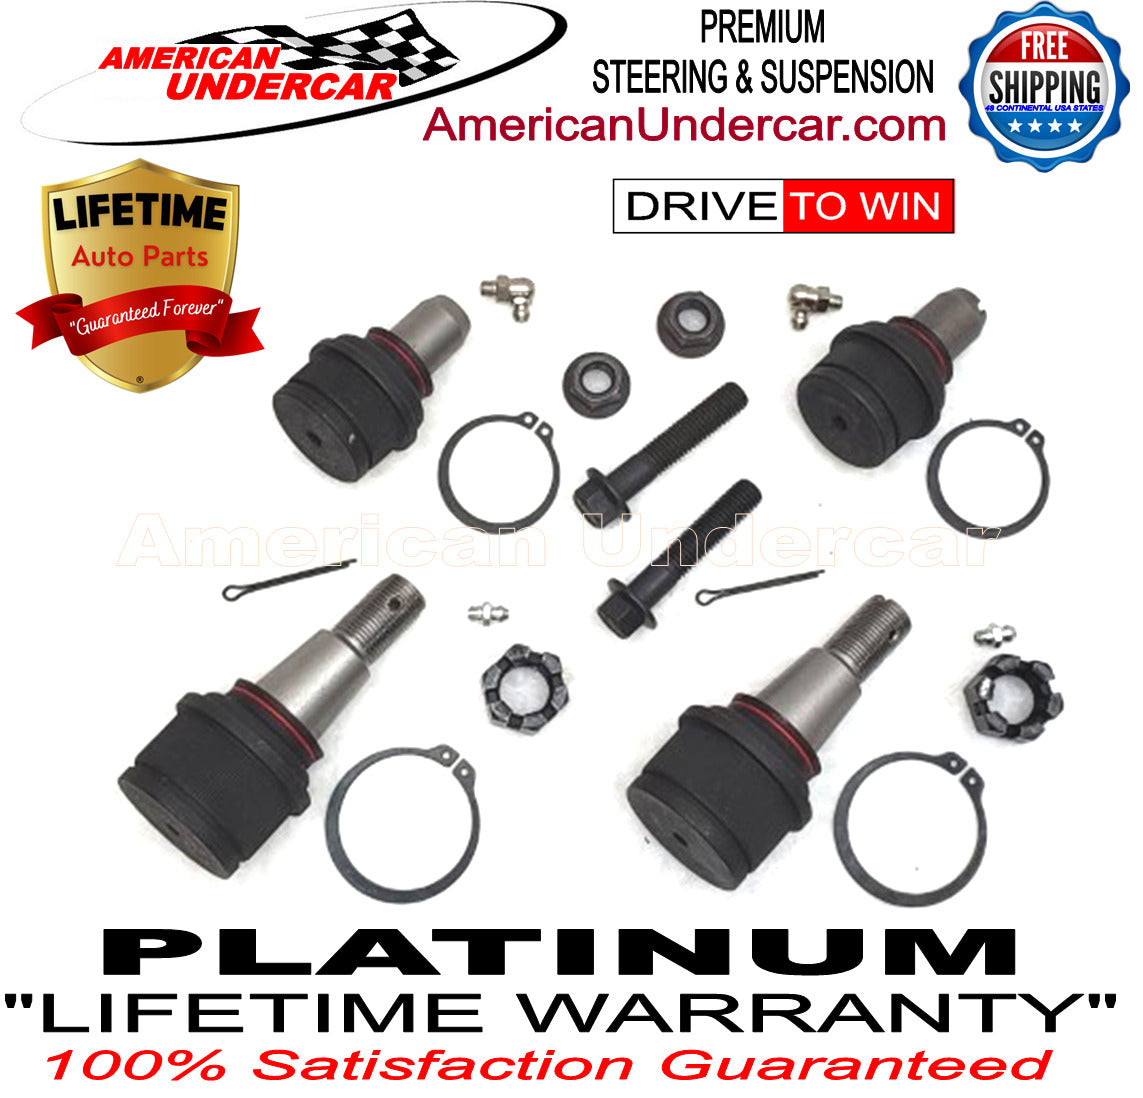 Lifetime Ball Joint Upper Lower Suspension Kit for 2000-2005 Ford Excursion 2WD